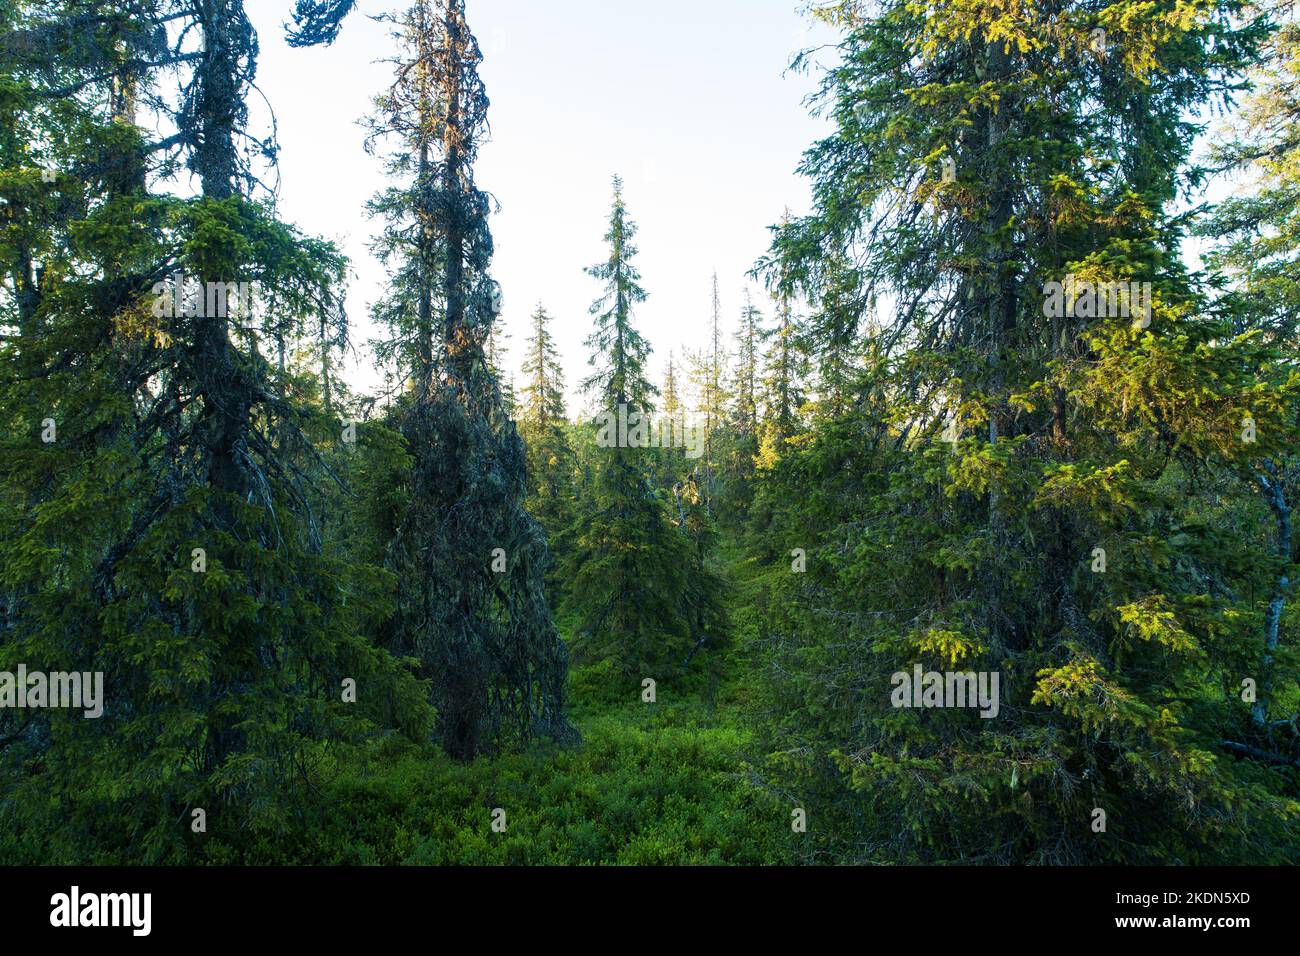 Summery old-growth taiga forest in Riisitunturi National Park, Northern Finland Stock Photo